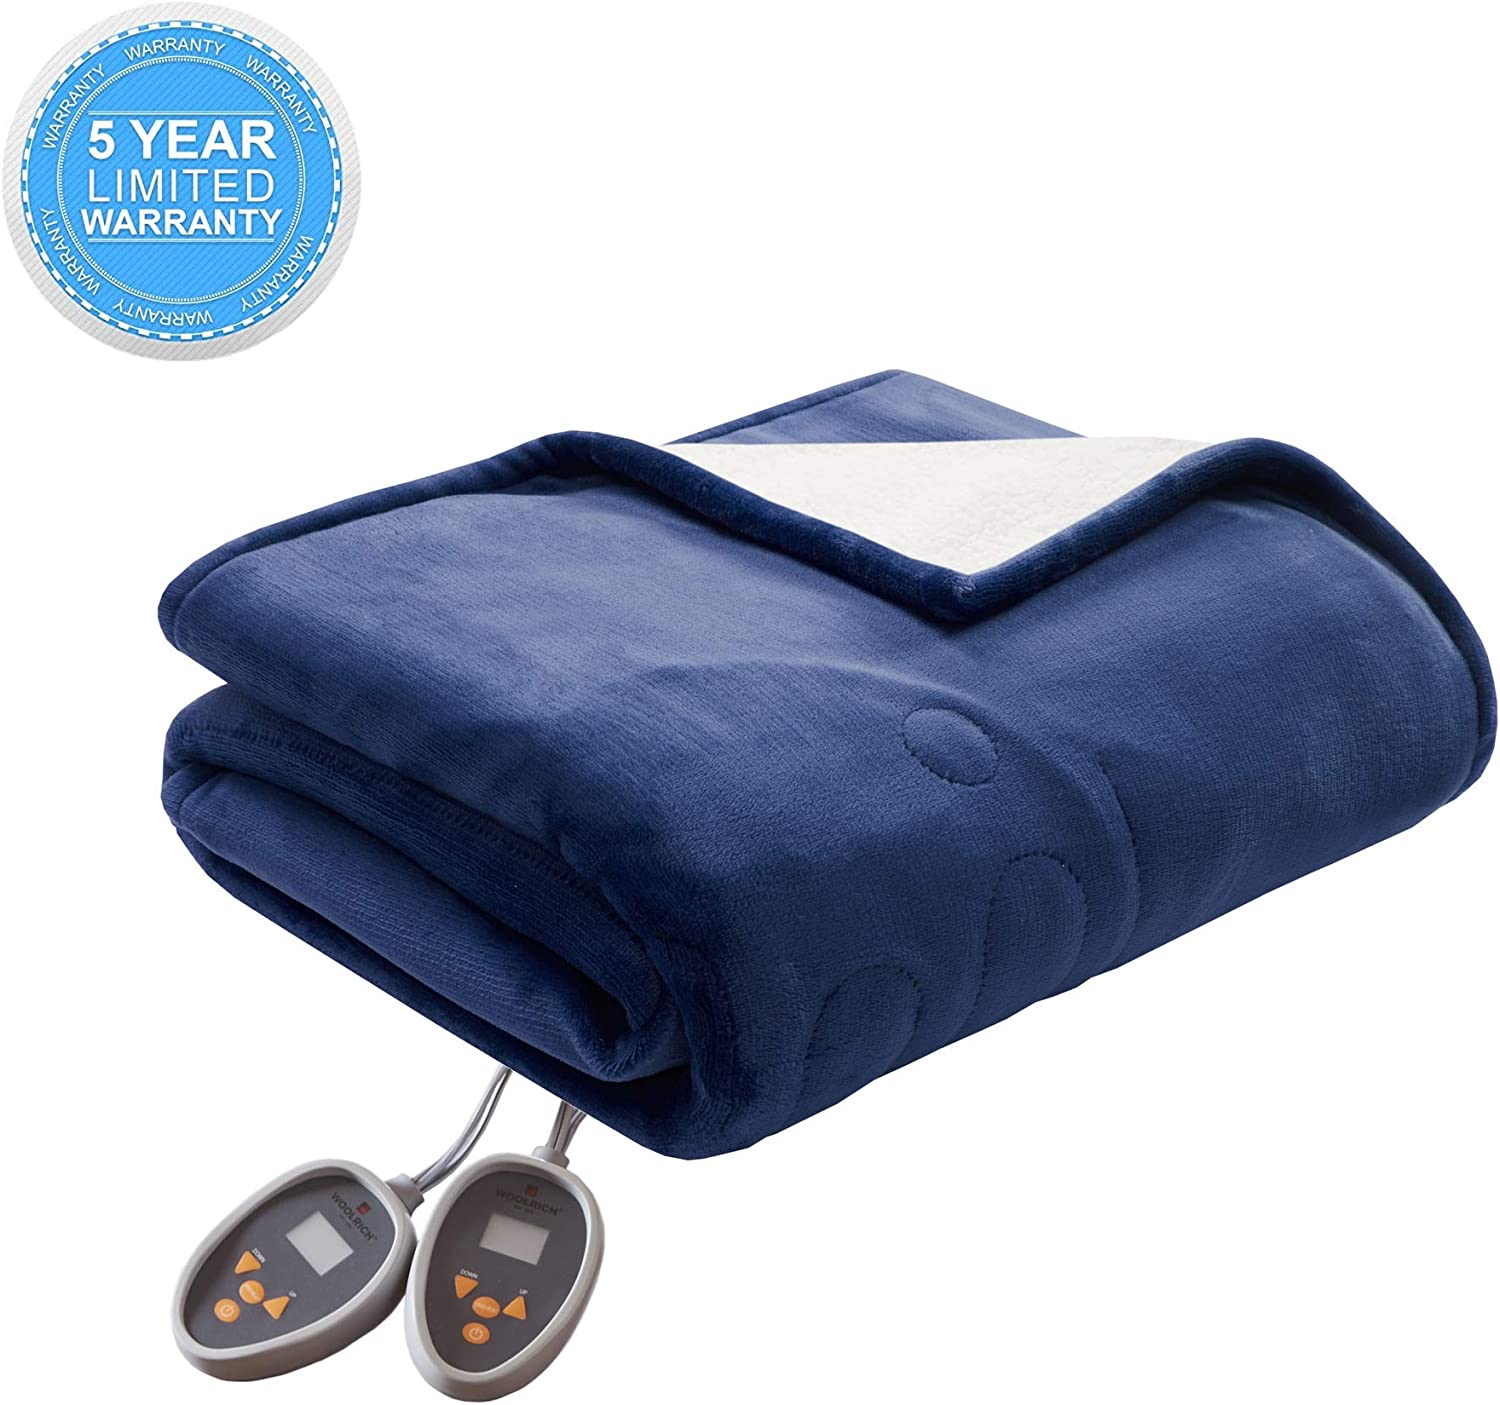 Woolrich Heated Plush to Berber Electric Blanket Throw Ultra Soft Knitted , Super Warm and Snuggly Cozy with Auto Shut Off and Multi Heat Level Setting Controllers, Twin: 62x84", Indigo (WR54-1759)